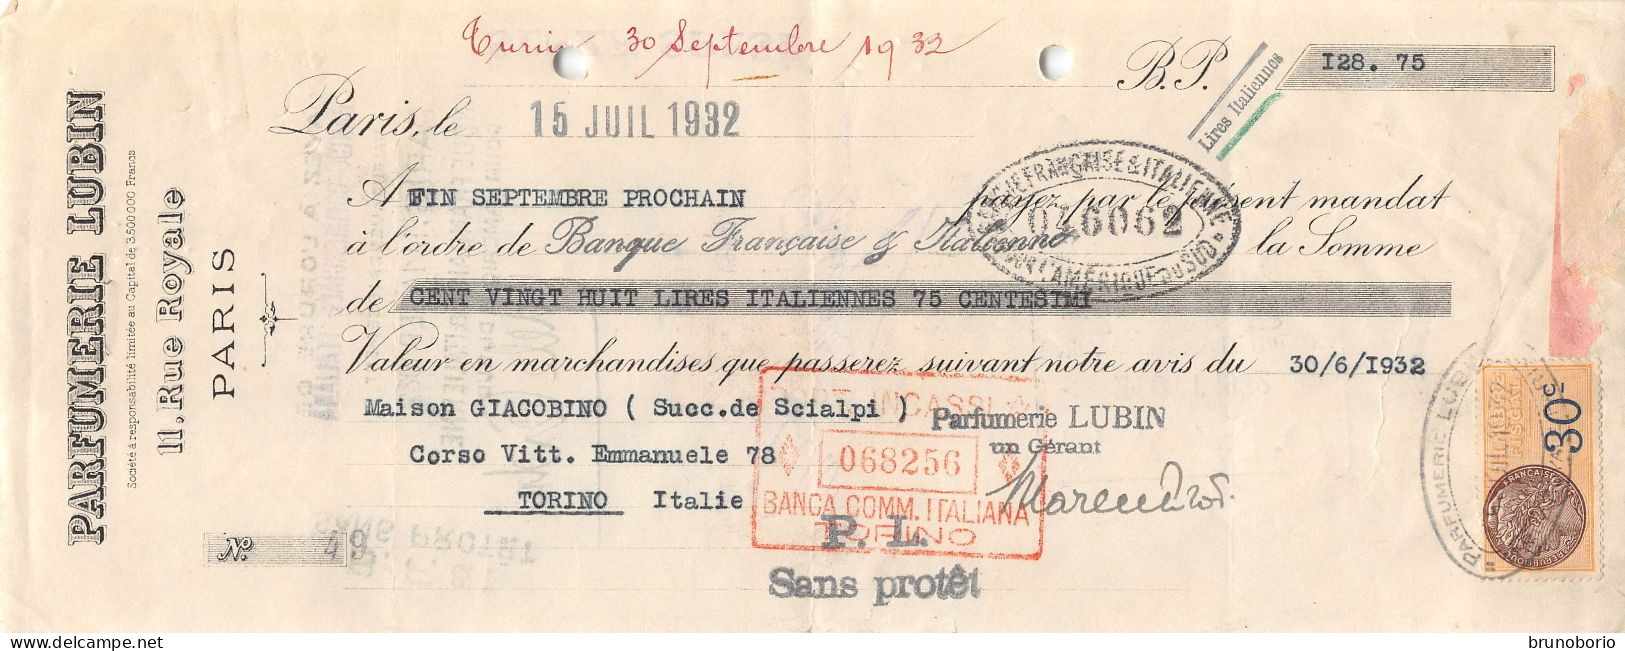 00158 "PARFUMERIE LUBIN- PARIS  - DITTA GIACOBINO -TORINO . CAMBIALE NR 49 - 15 JUIL 1932-BANCA COMMERCIALE"  CAMB. ORIG - Wechsel